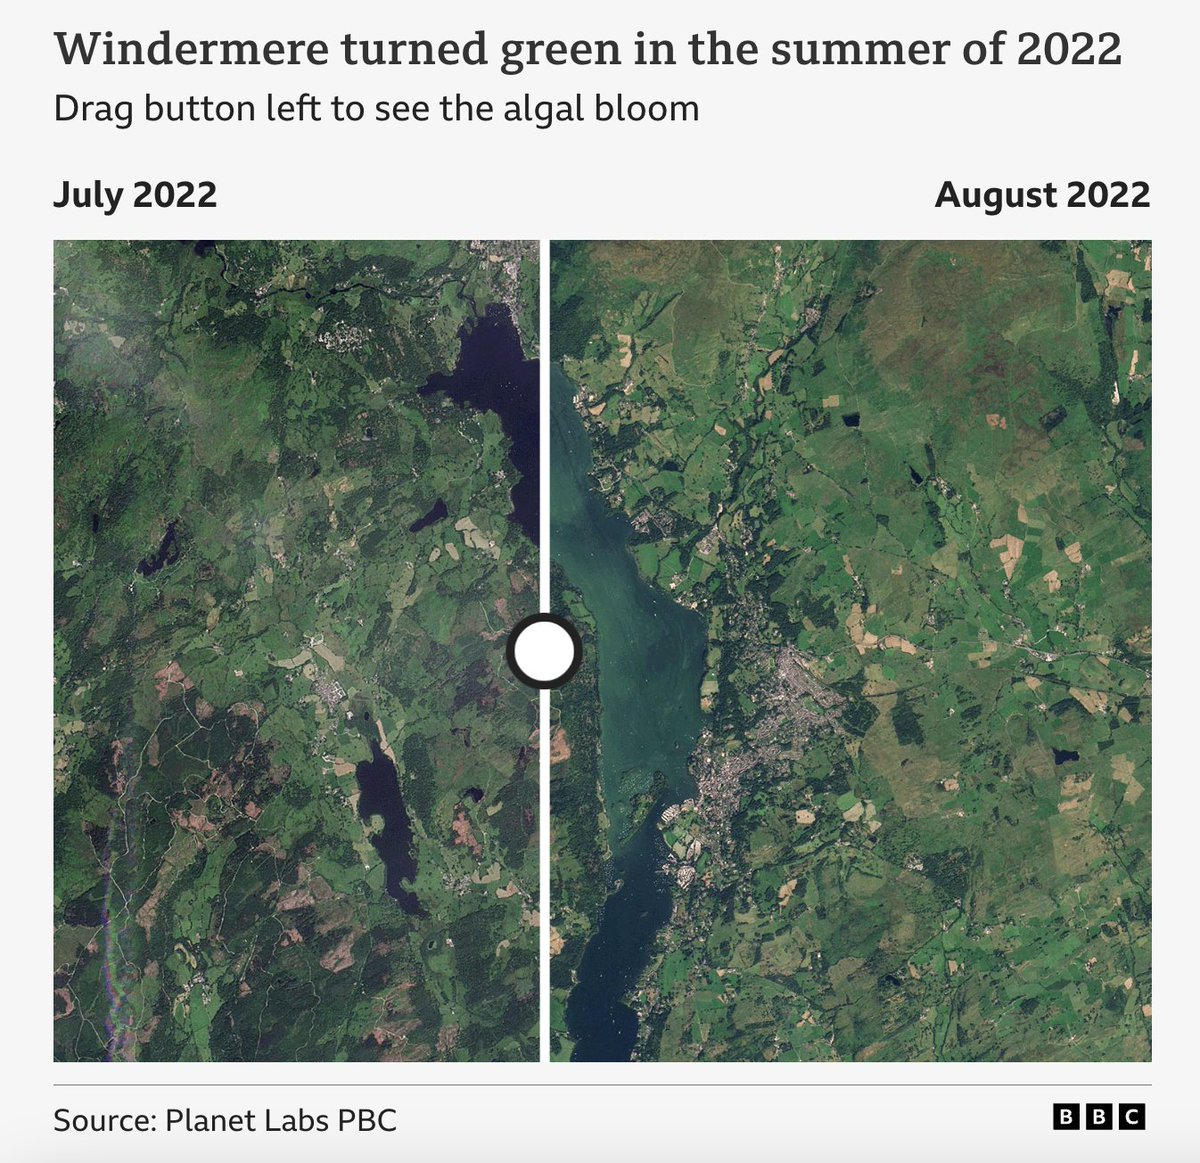 In recent summers, algal bloom turned the Windermere water green and potentially toxic - partly caused by both treated and untreated sewage 🤮 Source: bbc.co.uk/news/articles/…